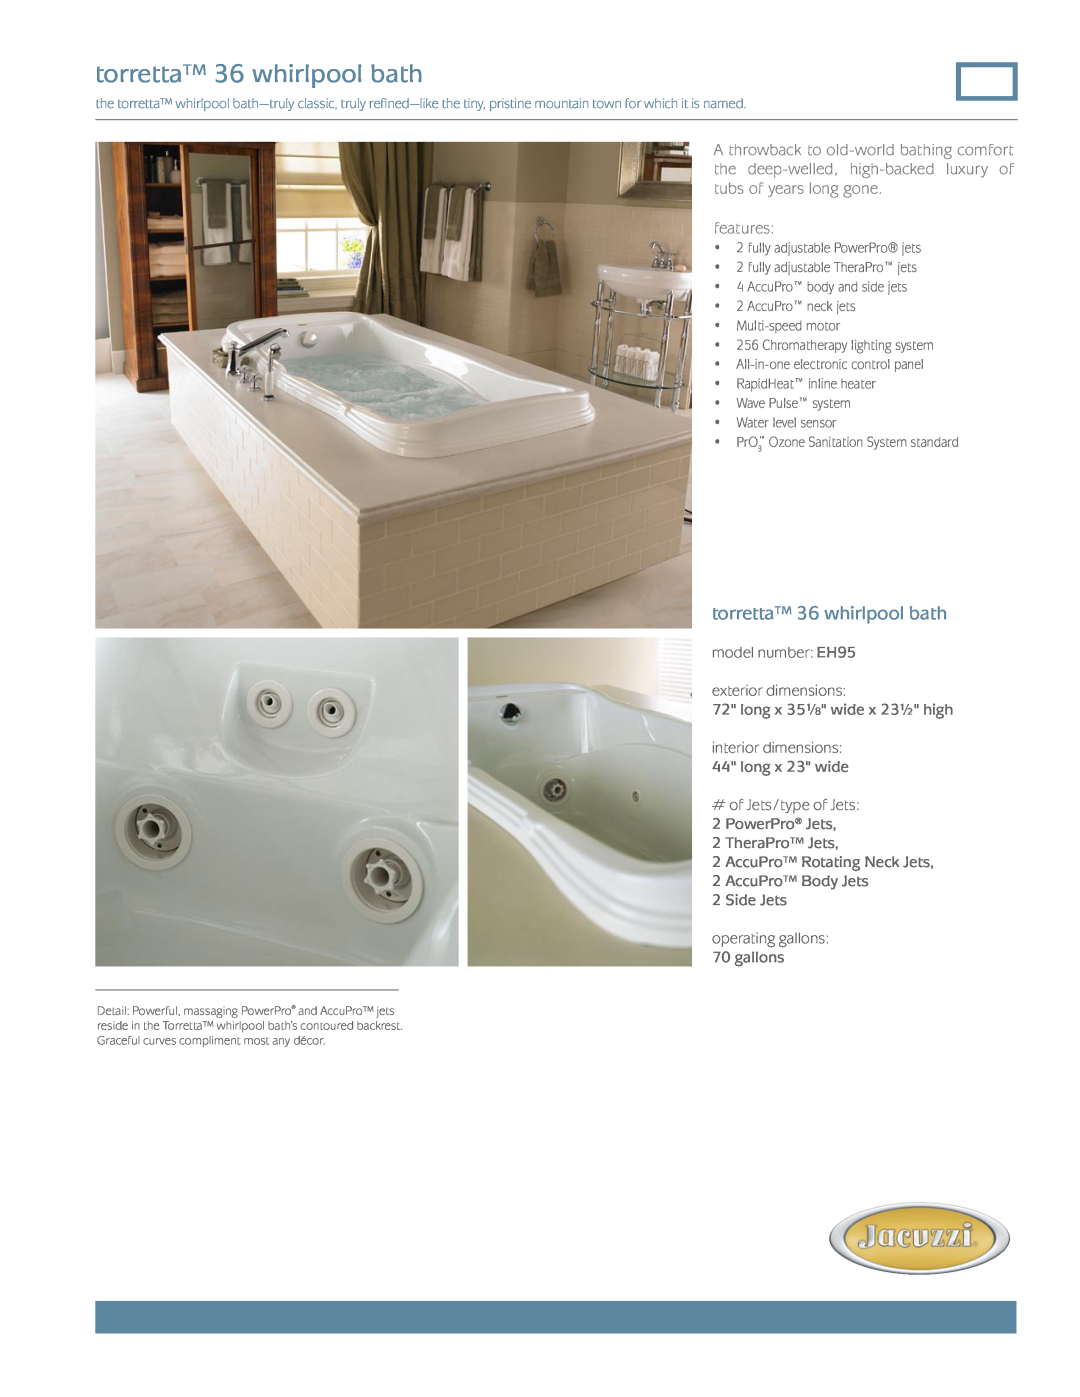 Jacuzzi dimensions torretta 36 whirlpool bath, features, model number EH95 exterior dimensions 